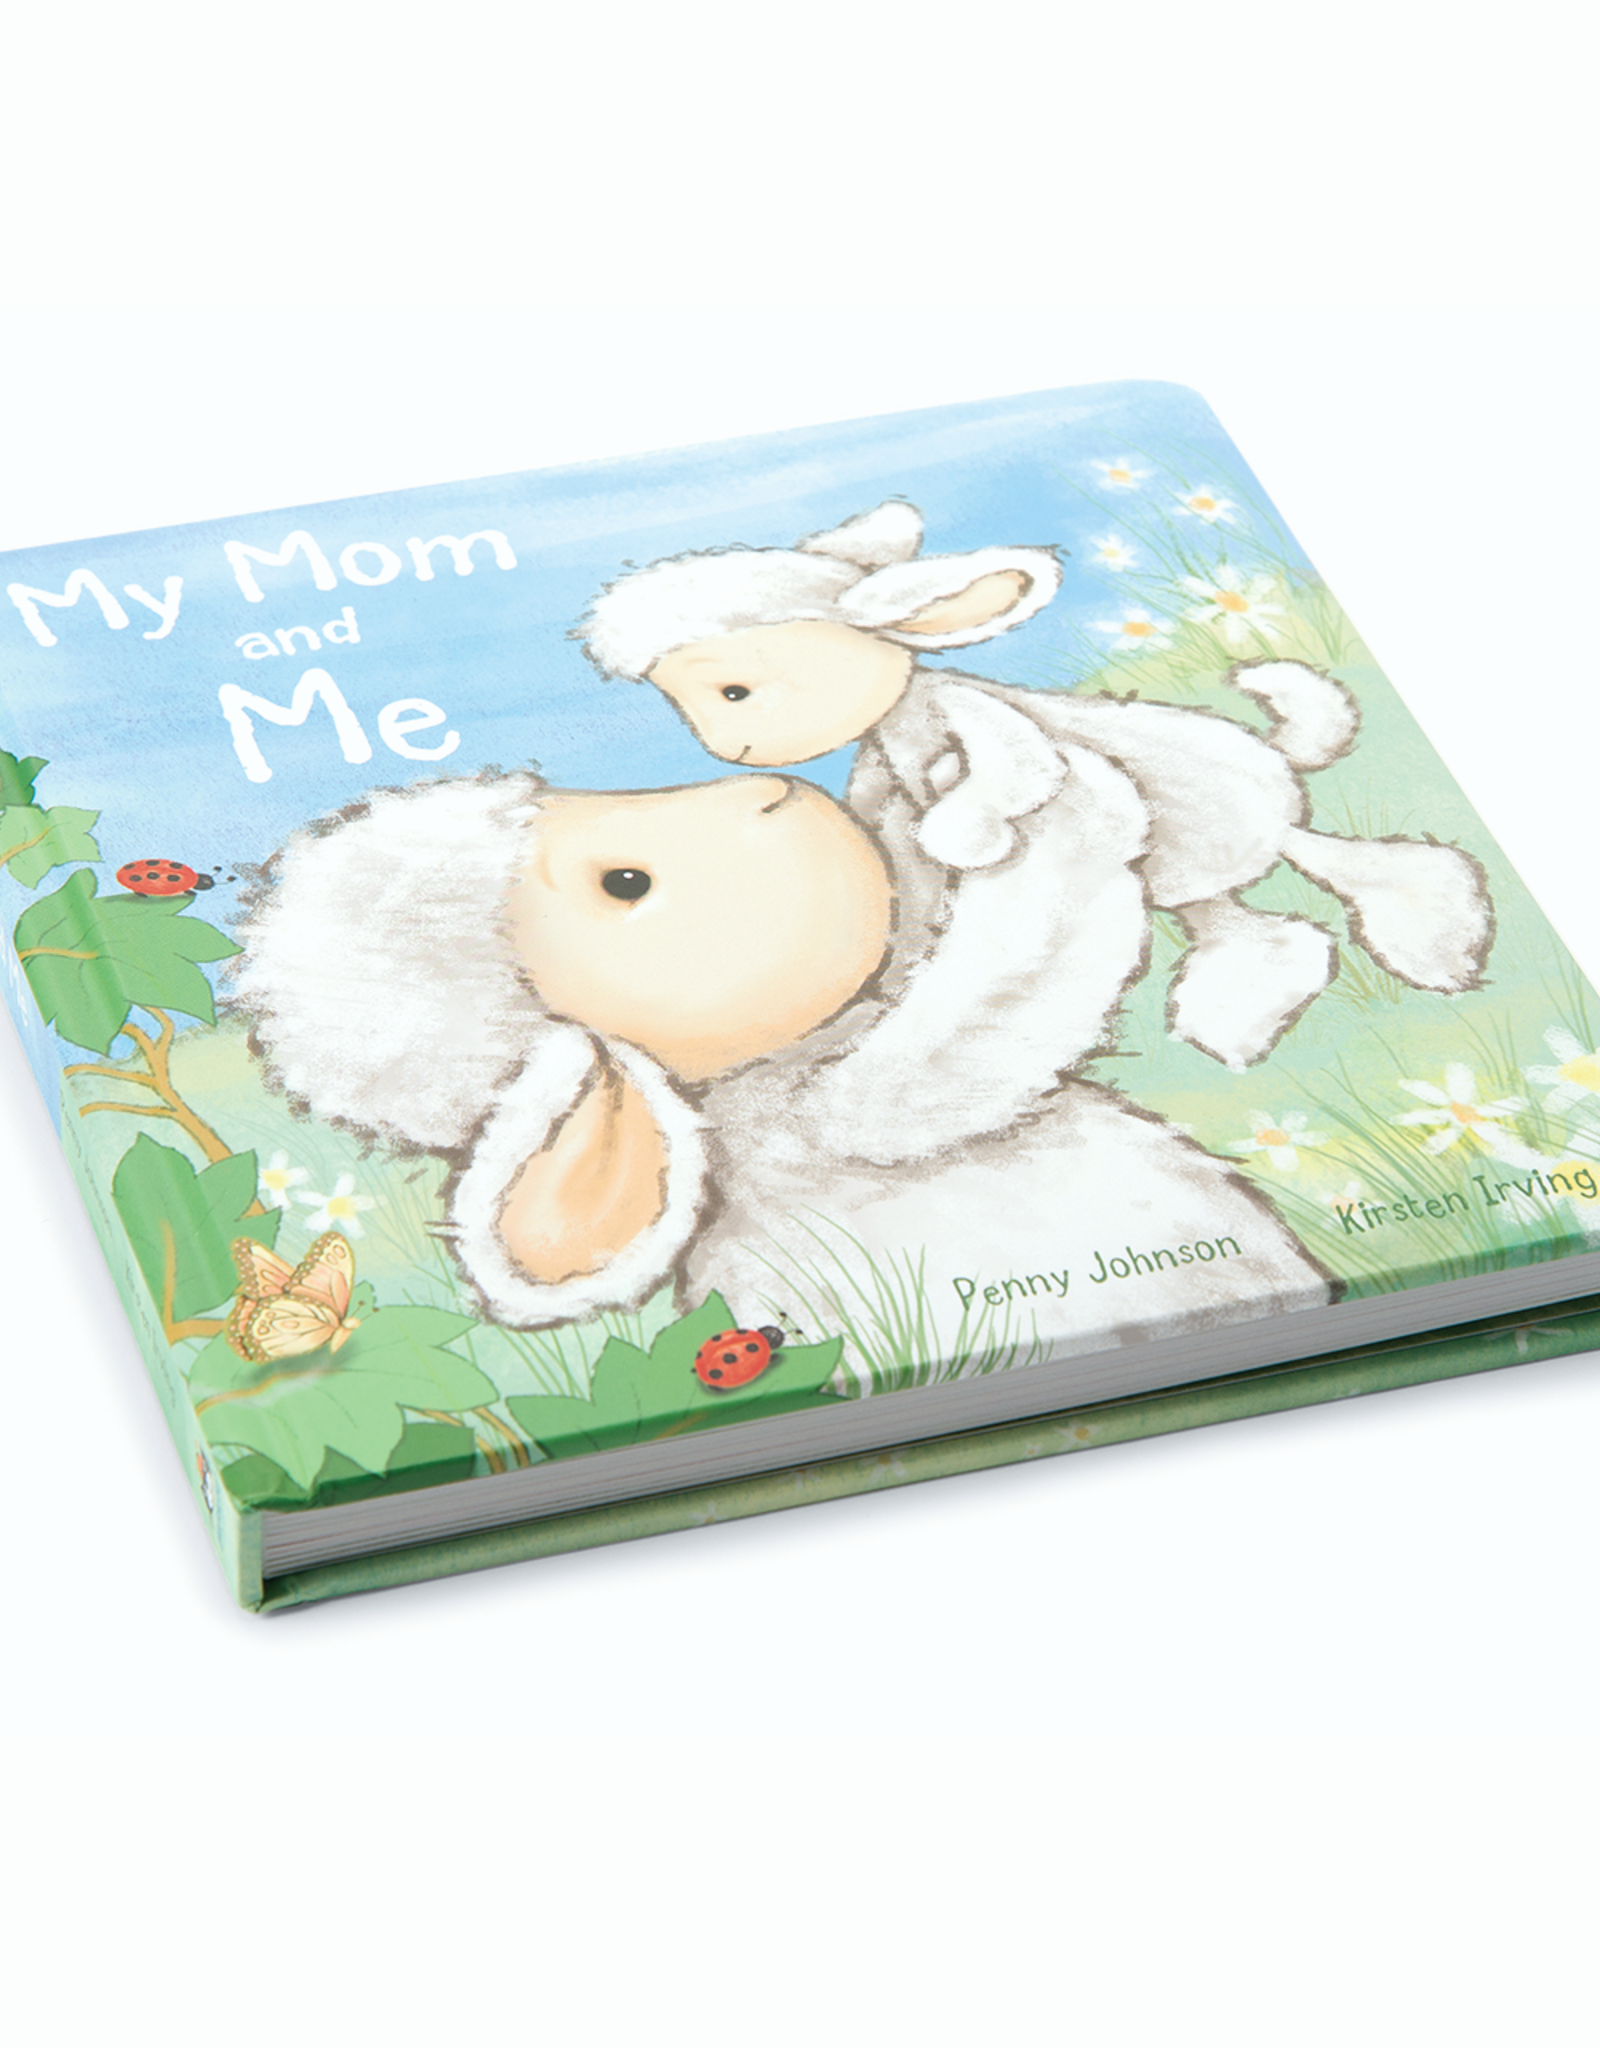 Jellycat My Mom and Me book